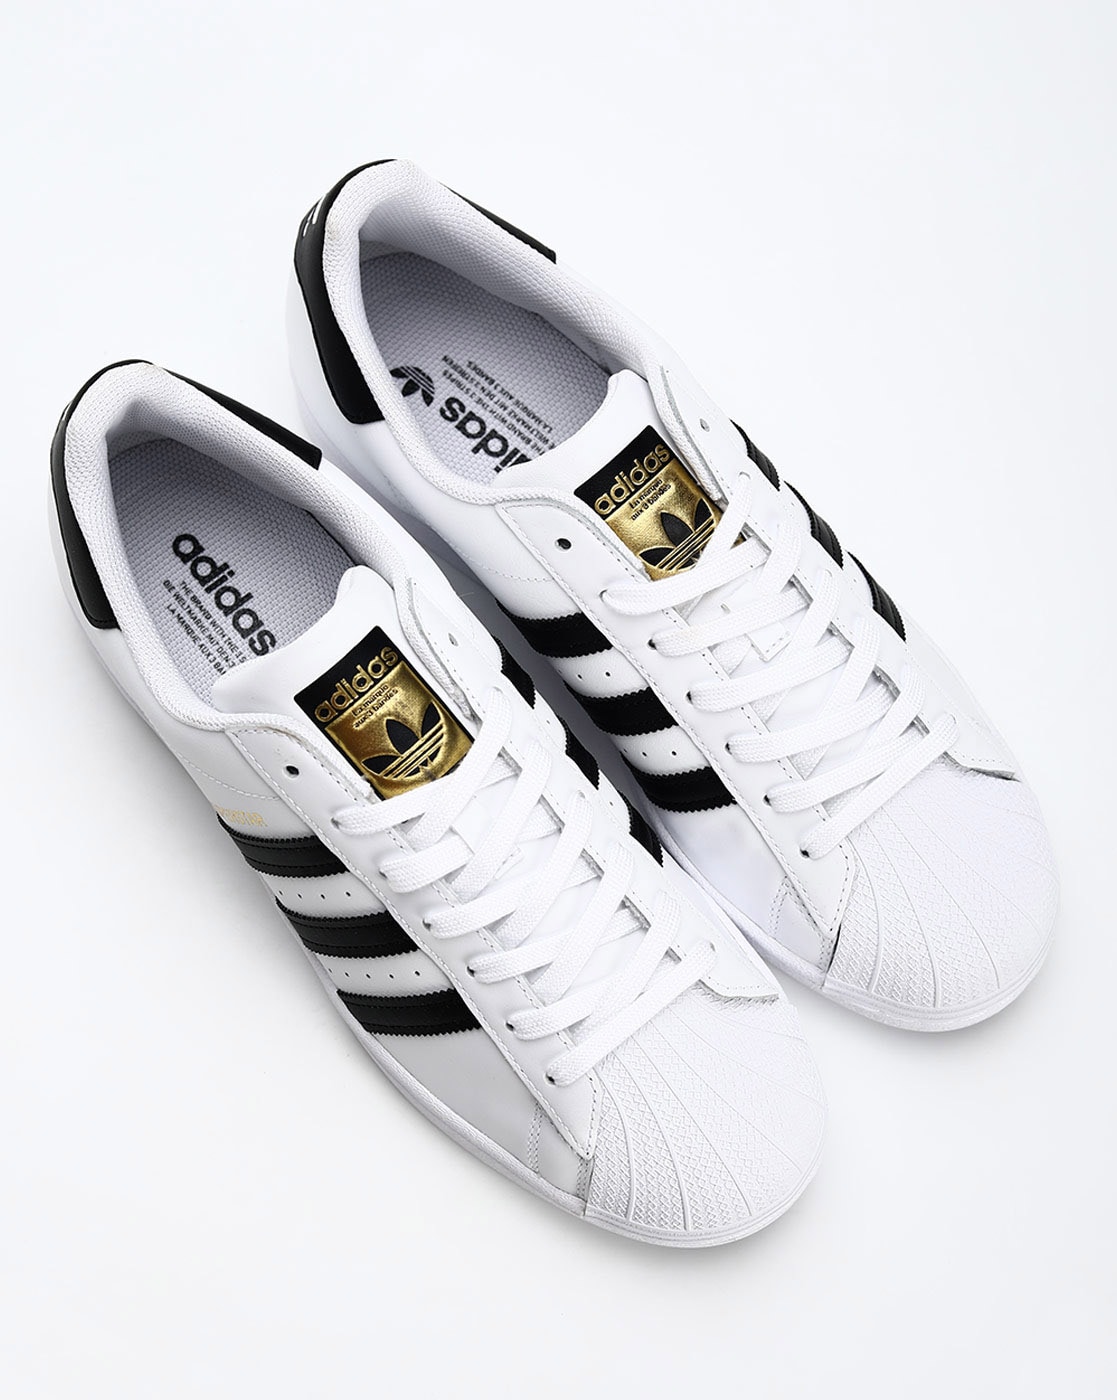 Adidas Originals Sneakers White | vlr.eng.br